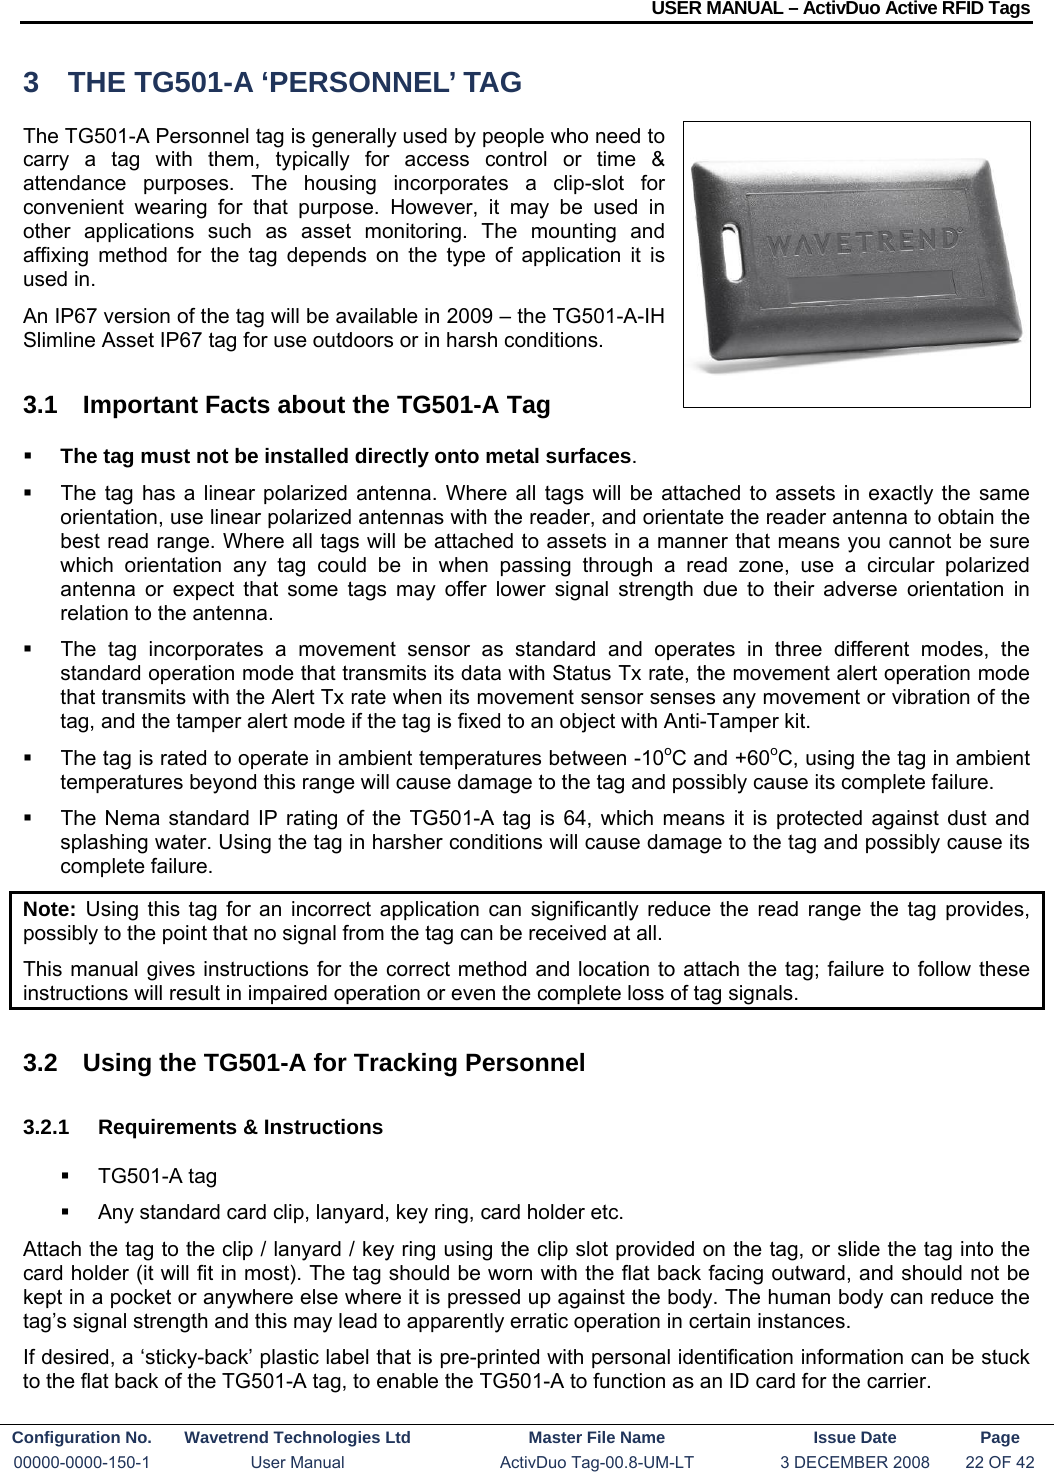 USER MANUAL – ActivDuo Active RFID Tags Configuration No.  Wavetrend Technologies Ltd  Master File Name   Issue Date  Page 00000-0000-150-1  User Manual  ActivDuo Tag-00.8-UM-LT  3 DECEMBER 2008  22 OF 42  3  THE TG501-A ‘PERSONNEL’ TAG The TG501-A Personnel tag is generally used by people who need to carry a tag with them, typically for access control or time &amp; attendance purposes. The housing incorporates a clip-slot for convenient wearing for that purpose. However, it may be used in other applications such as asset monitoring. The mounting and affixing method for the tag depends on the type of application it is used in. An IP67 version of the tag will be available in 2009 – the TG501-A-IH Slimline Asset IP67 tag for use outdoors or in harsh conditions. 3.1  Important Facts about the TG501-A Tag  The tag must not be installed directly onto metal surfaces.    The tag has a linear polarized antenna. Where all tags will be attached to assets in exactly the same orientation, use linear polarized antennas with the reader, and orientate the reader antenna to obtain the best read range. Where all tags will be attached to assets in a manner that means you cannot be sure which orientation any tag could be in when passing through a read zone, use a circular polarized antenna or expect that some tags may offer lower signal strength due to their adverse orientation in relation to the antenna.   The tag incorporates a movement sensor as standard and operates in three different modes, the standard operation mode that transmits its data with Status Tx rate, the movement alert operation mode that transmits with the Alert Tx rate when its movement sensor senses any movement or vibration of the tag, and the tamper alert mode if the tag is fixed to an object with Anti-Tamper kit.   The tag is rated to operate in ambient temperatures between -10oC and +60oC, using the tag in ambient temperatures beyond this range will cause damage to the tag and possibly cause its complete failure.   The Nema standard IP rating of the TG501-A tag is 64, which means it is protected against dust and splashing water. Using the tag in harsher conditions will cause damage to the tag and possibly cause its complete failure. Note:  Using this tag for an incorrect application can significantly reduce the read range the tag provides, possibly to the point that no signal from the tag can be received at all. This manual gives instructions for the correct method and location to attach the tag; failure to follow these instructions will result in impaired operation or even the complete loss of tag signals.  3.2  Using the TG501-A for Tracking Personnel 3.2.1  Requirements &amp; Instructions  TG501-A tag   Any standard card clip, lanyard, key ring, card holder etc. Attach the tag to the clip / lanyard / key ring using the clip slot provided on the tag, or slide the tag into the card holder (it will fit in most). The tag should be worn with the flat back facing outward, and should not be kept in a pocket or anywhere else where it is pressed up against the body. The human body can reduce the tag’s signal strength and this may lead to apparently erratic operation in certain instances. If desired, a ‘sticky-back’ plastic label that is pre-printed with personal identification information can be stuck to the flat back of the TG501-A tag, to enable the TG501-A to function as an ID card for the carrier. 